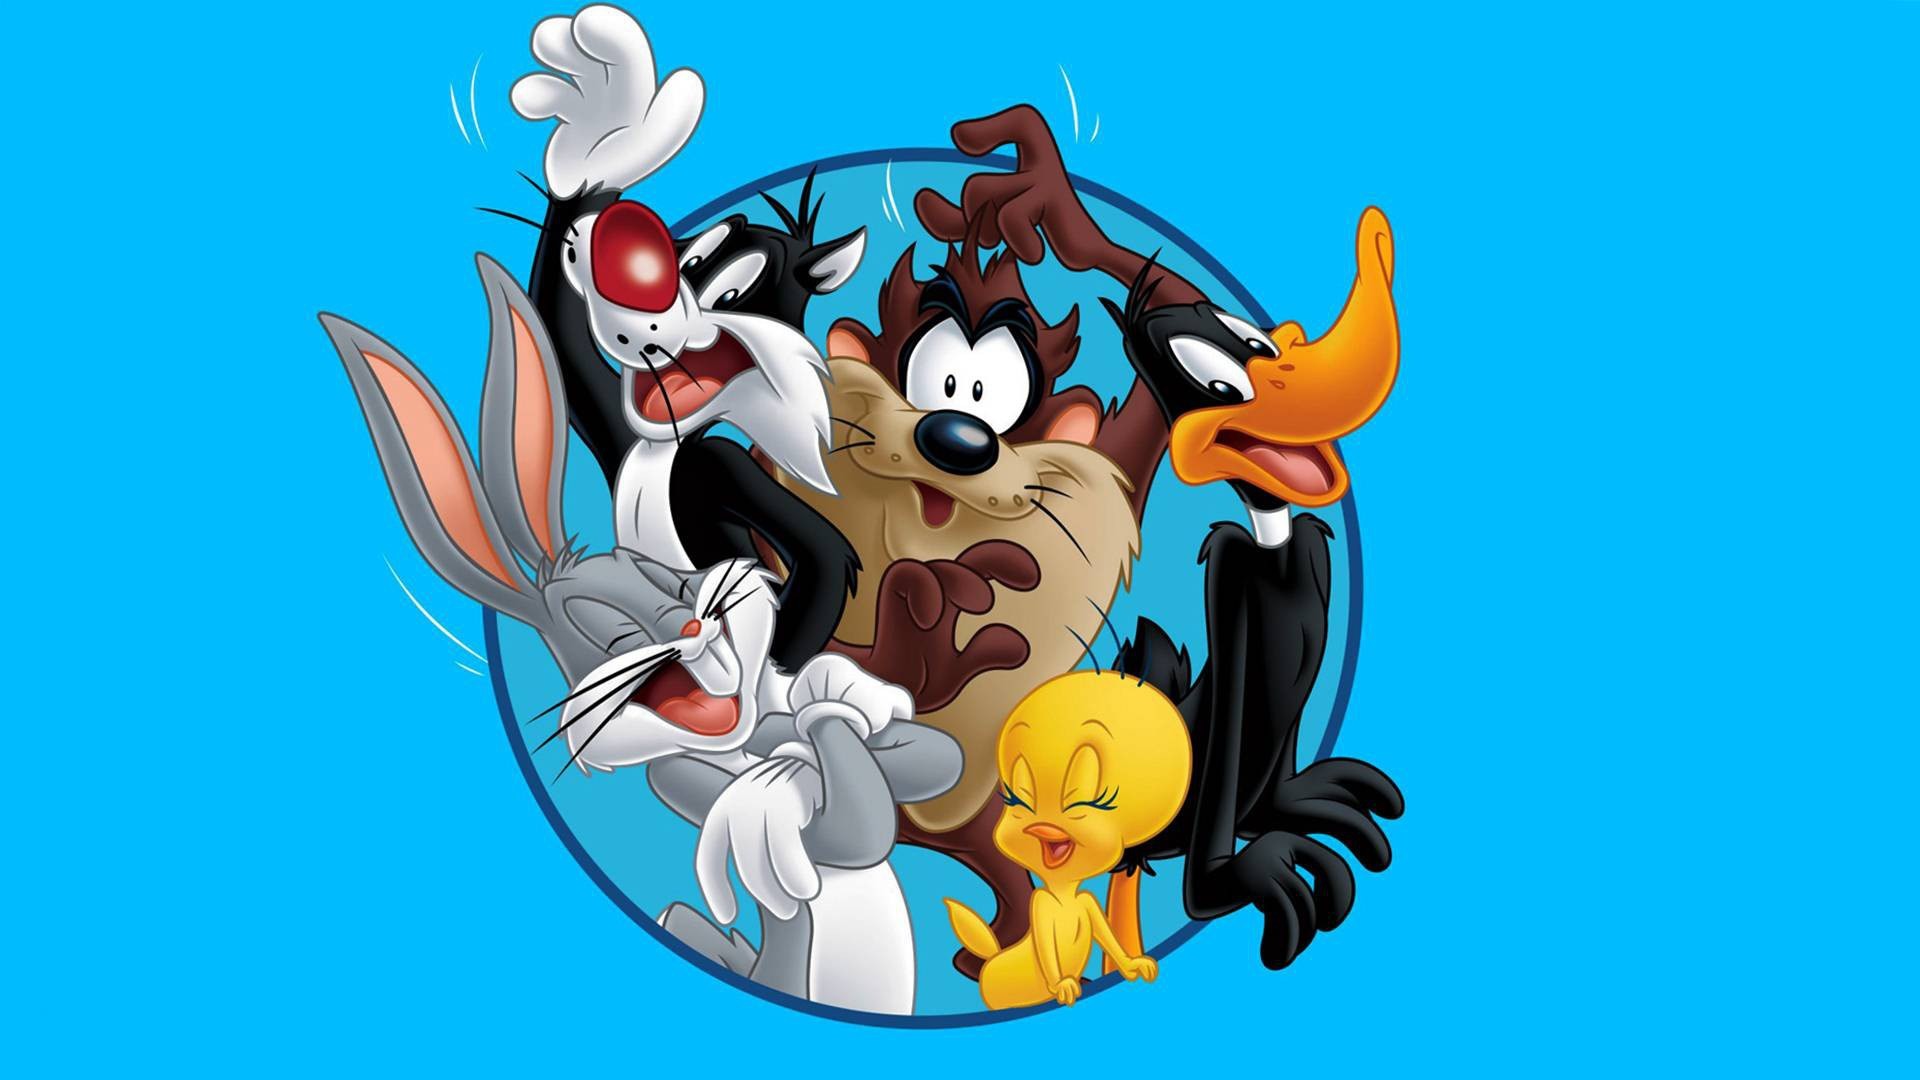 1920x1080 2017-03-26 - looney tunes image - Full HD Wallpapers, Photos,